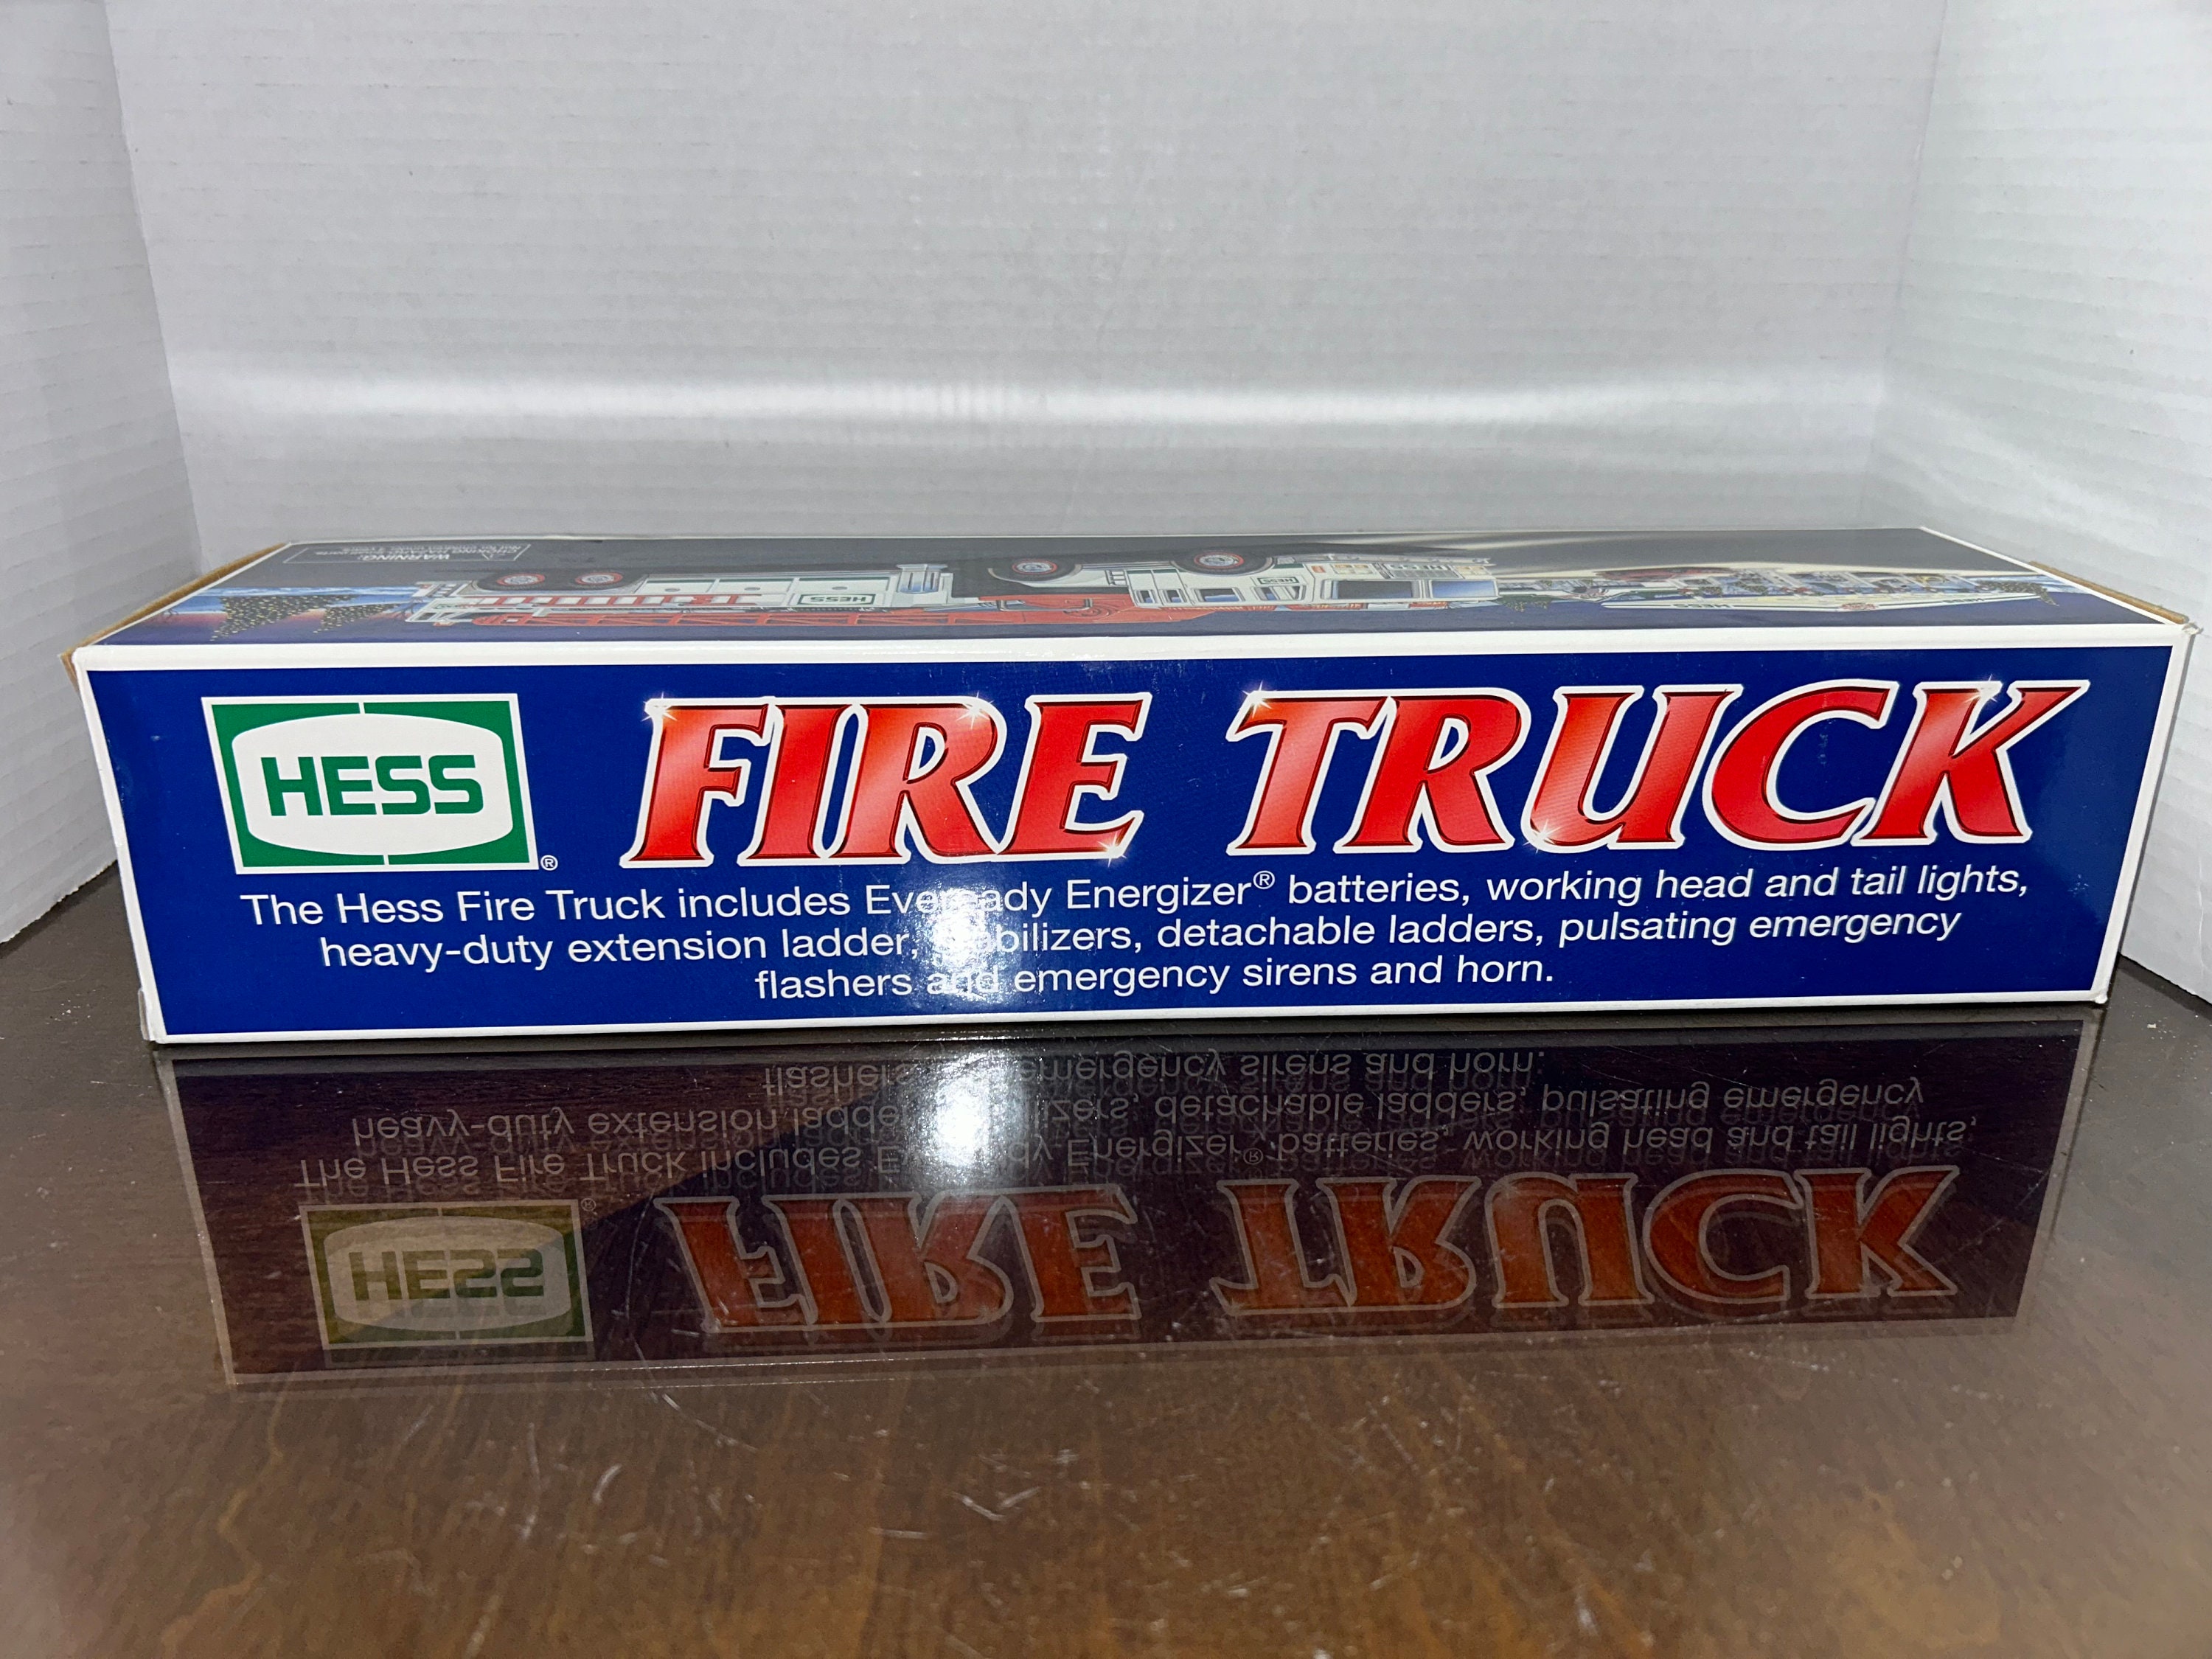 Hess 2000 Toy Fire Truck - Etsy